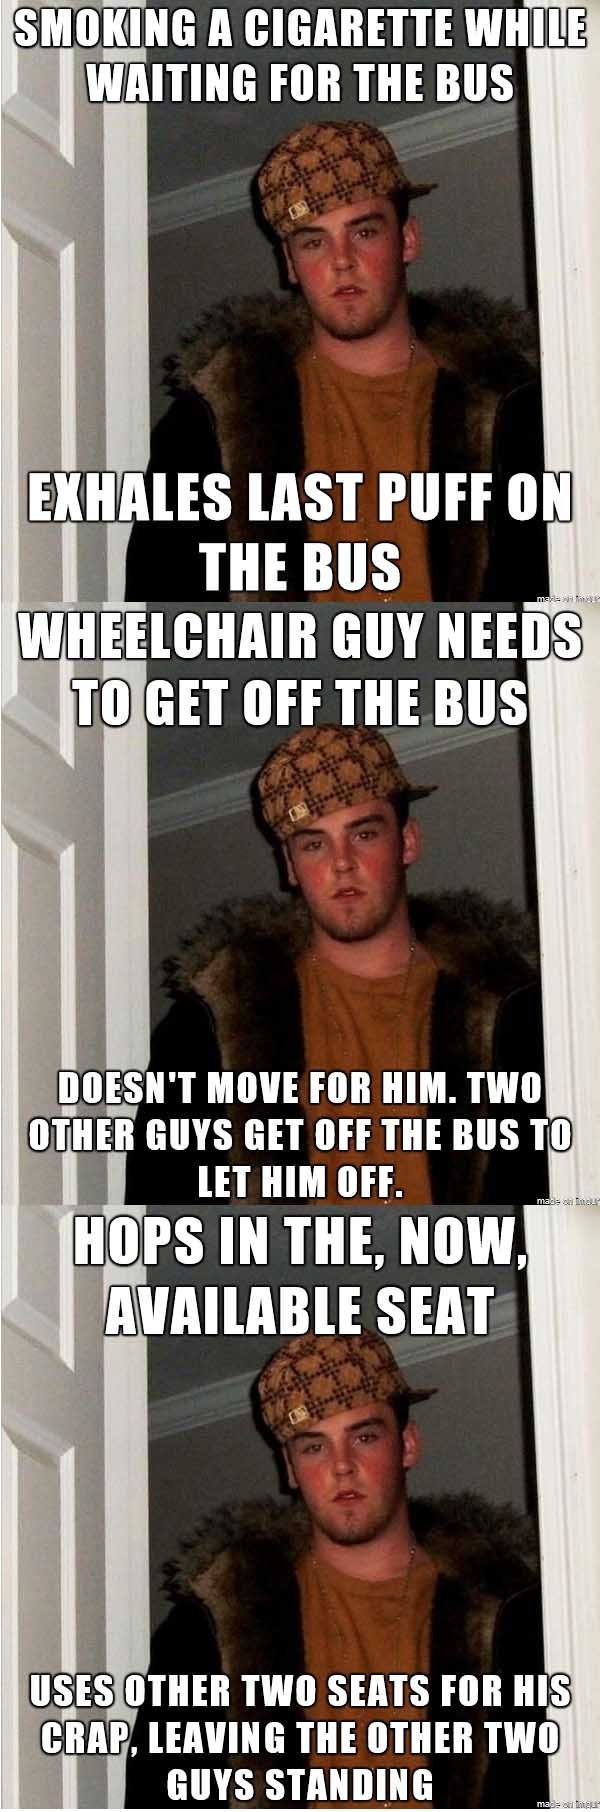 This guy on the bus was Scumbag Steve x 